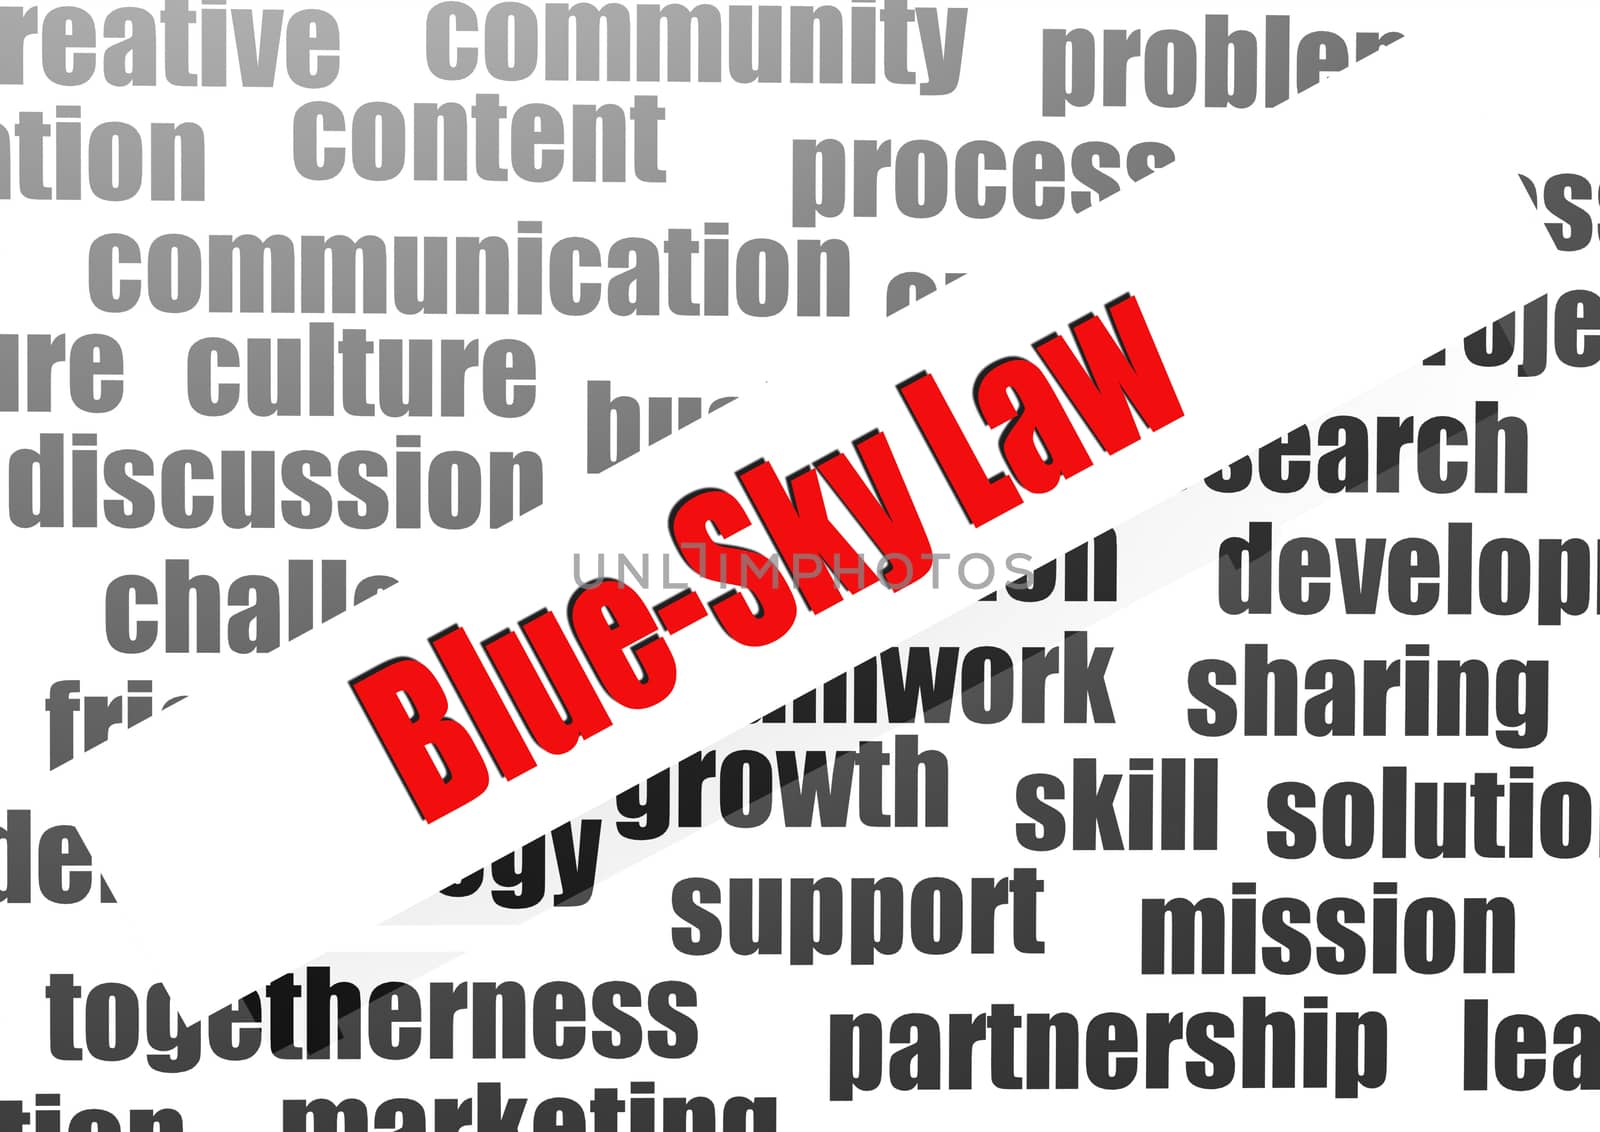 Blue-sky Law word cloud by tang90246